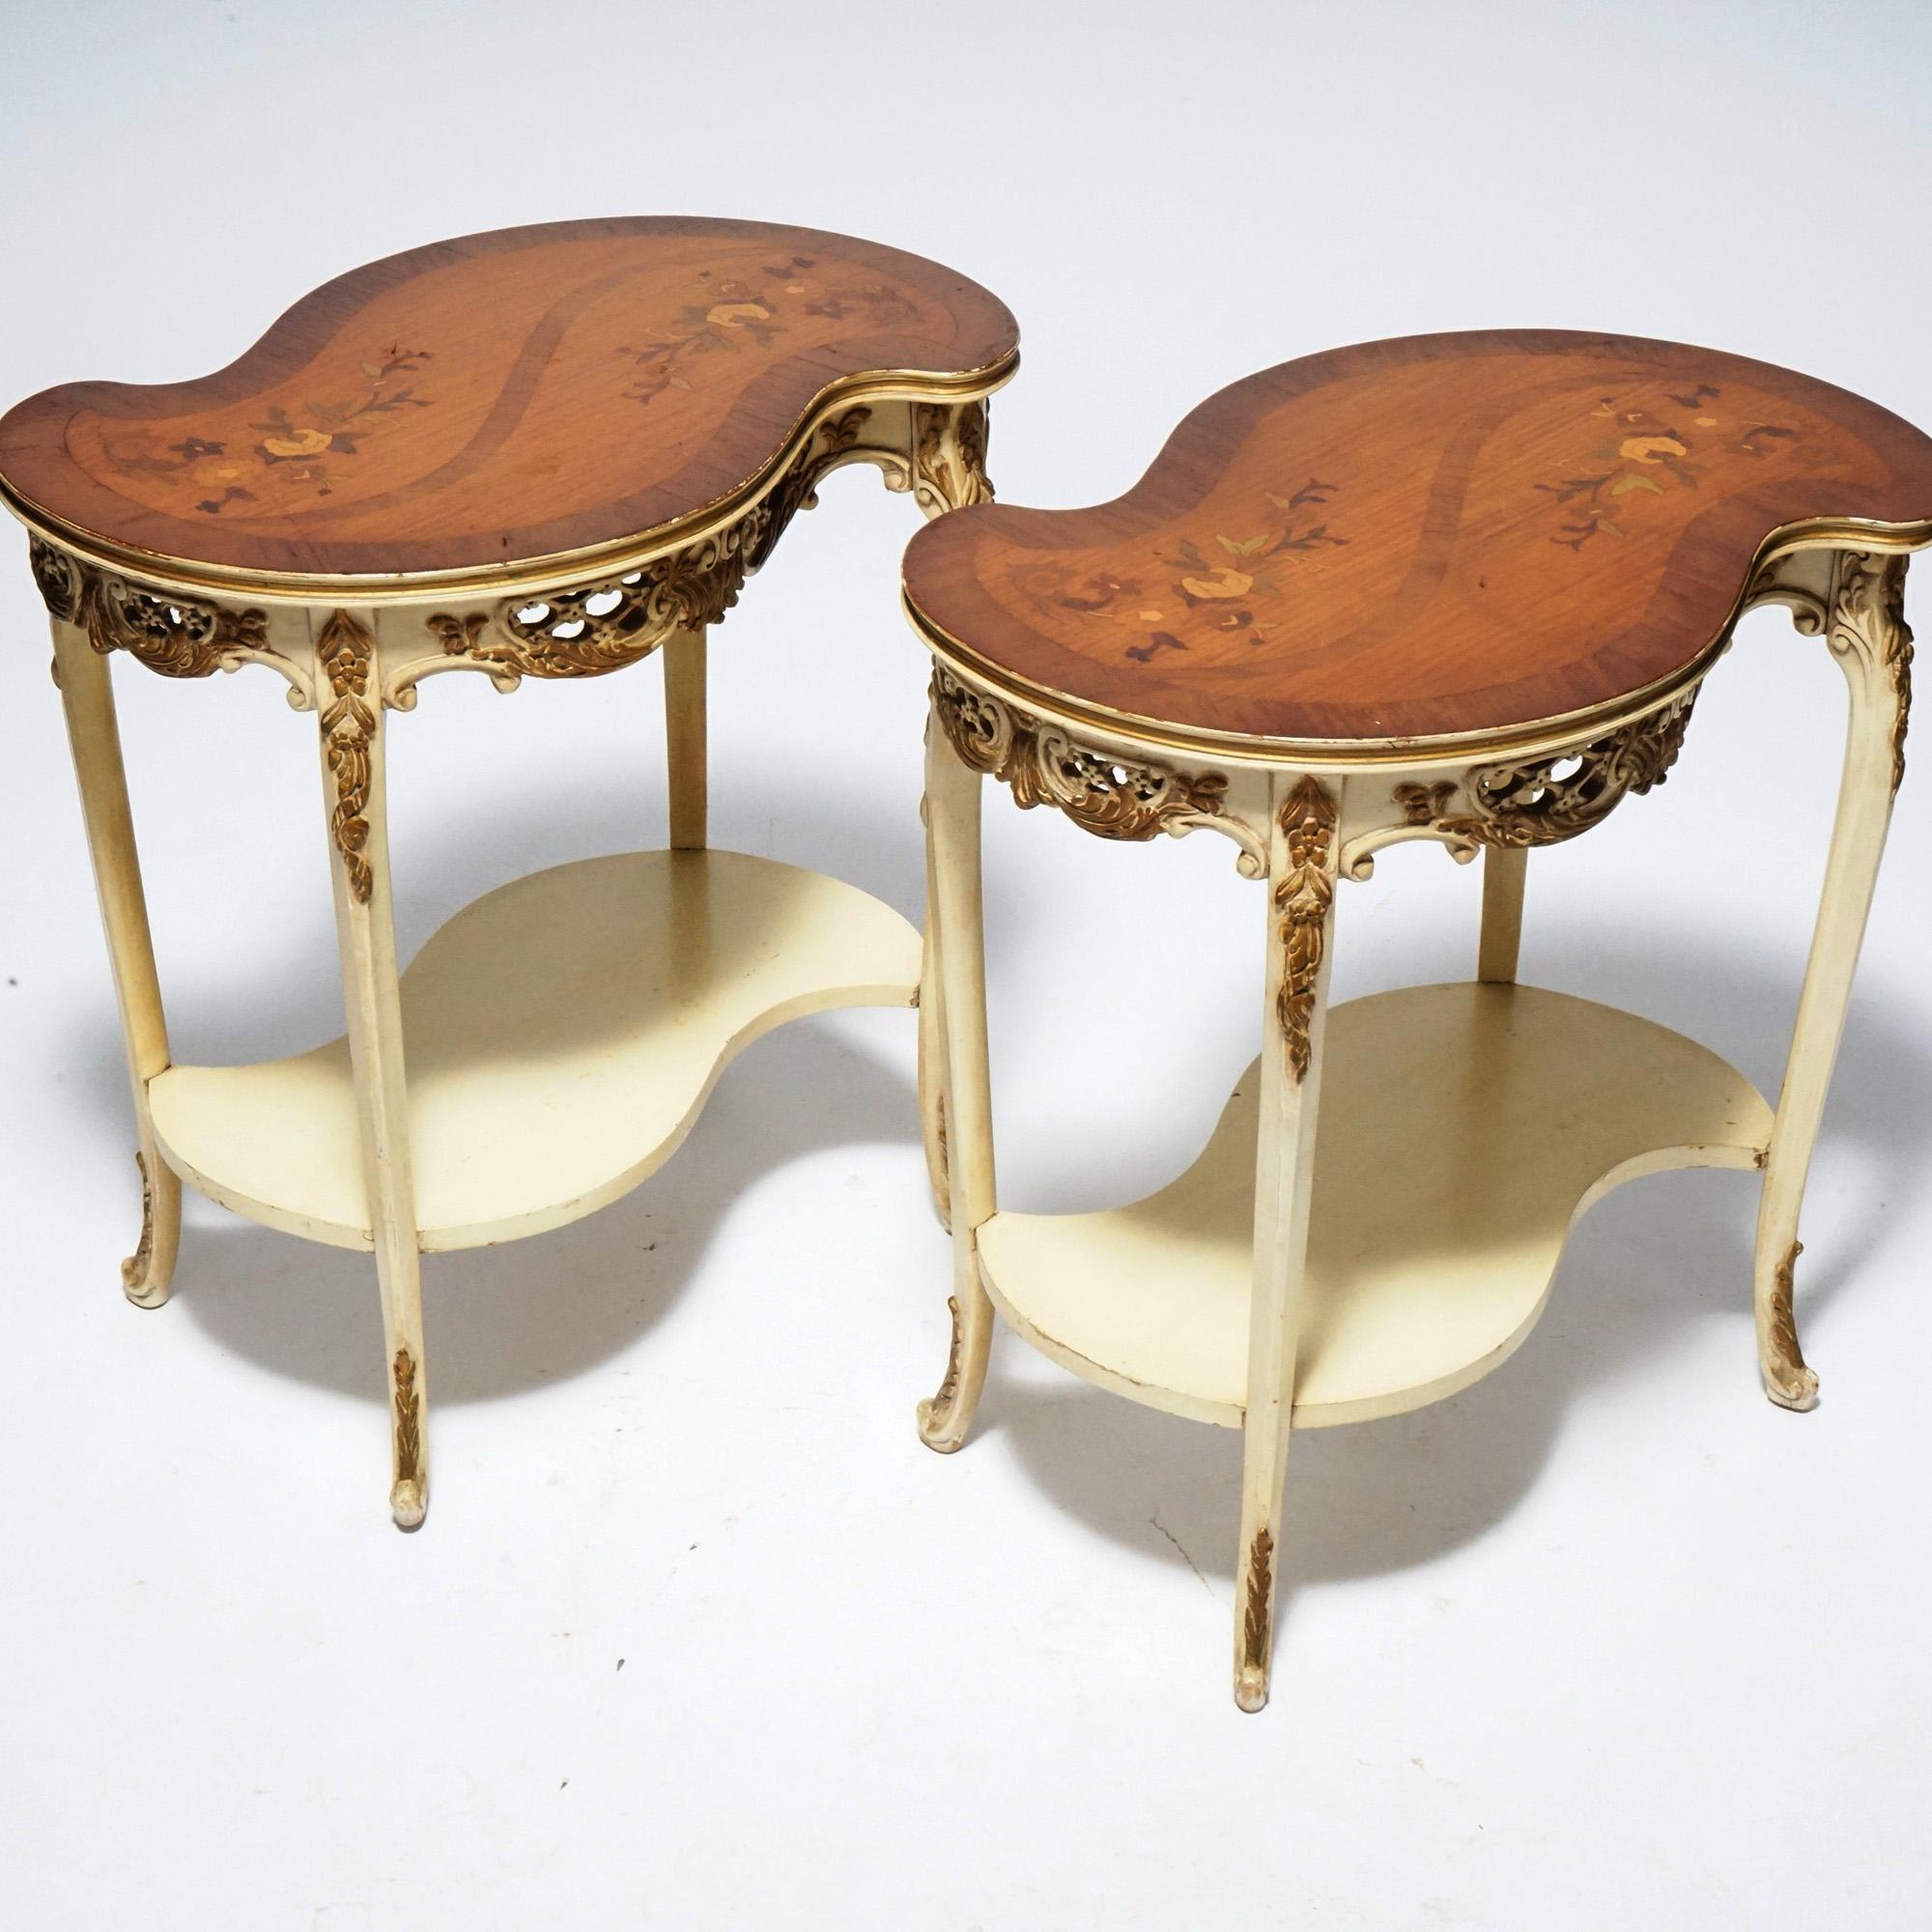 Antique pair of French Louis XVI style side stands offer serpentine form with satinwood floral marquetry tops over gilt decorated and painted bases with pierced skirt, cabriole legs and scroll form feet, c1930.

Measures- 25.25''H x 24.75''W x